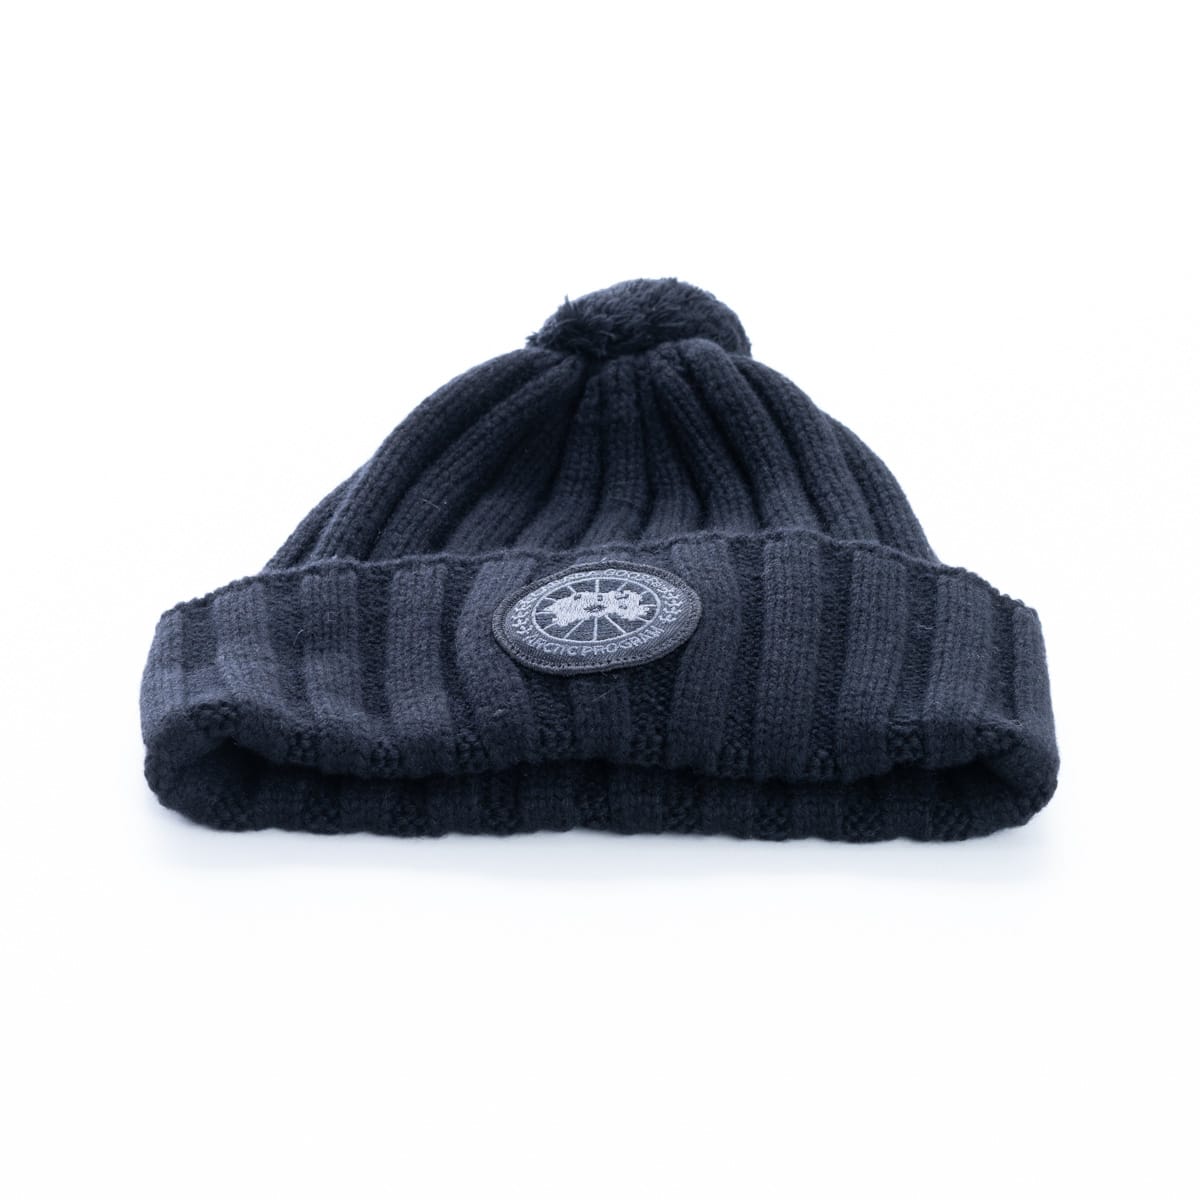 Canada Goose Canada Goose toque With Ribbed Border And Black Disc Wool And Cashmere Hat